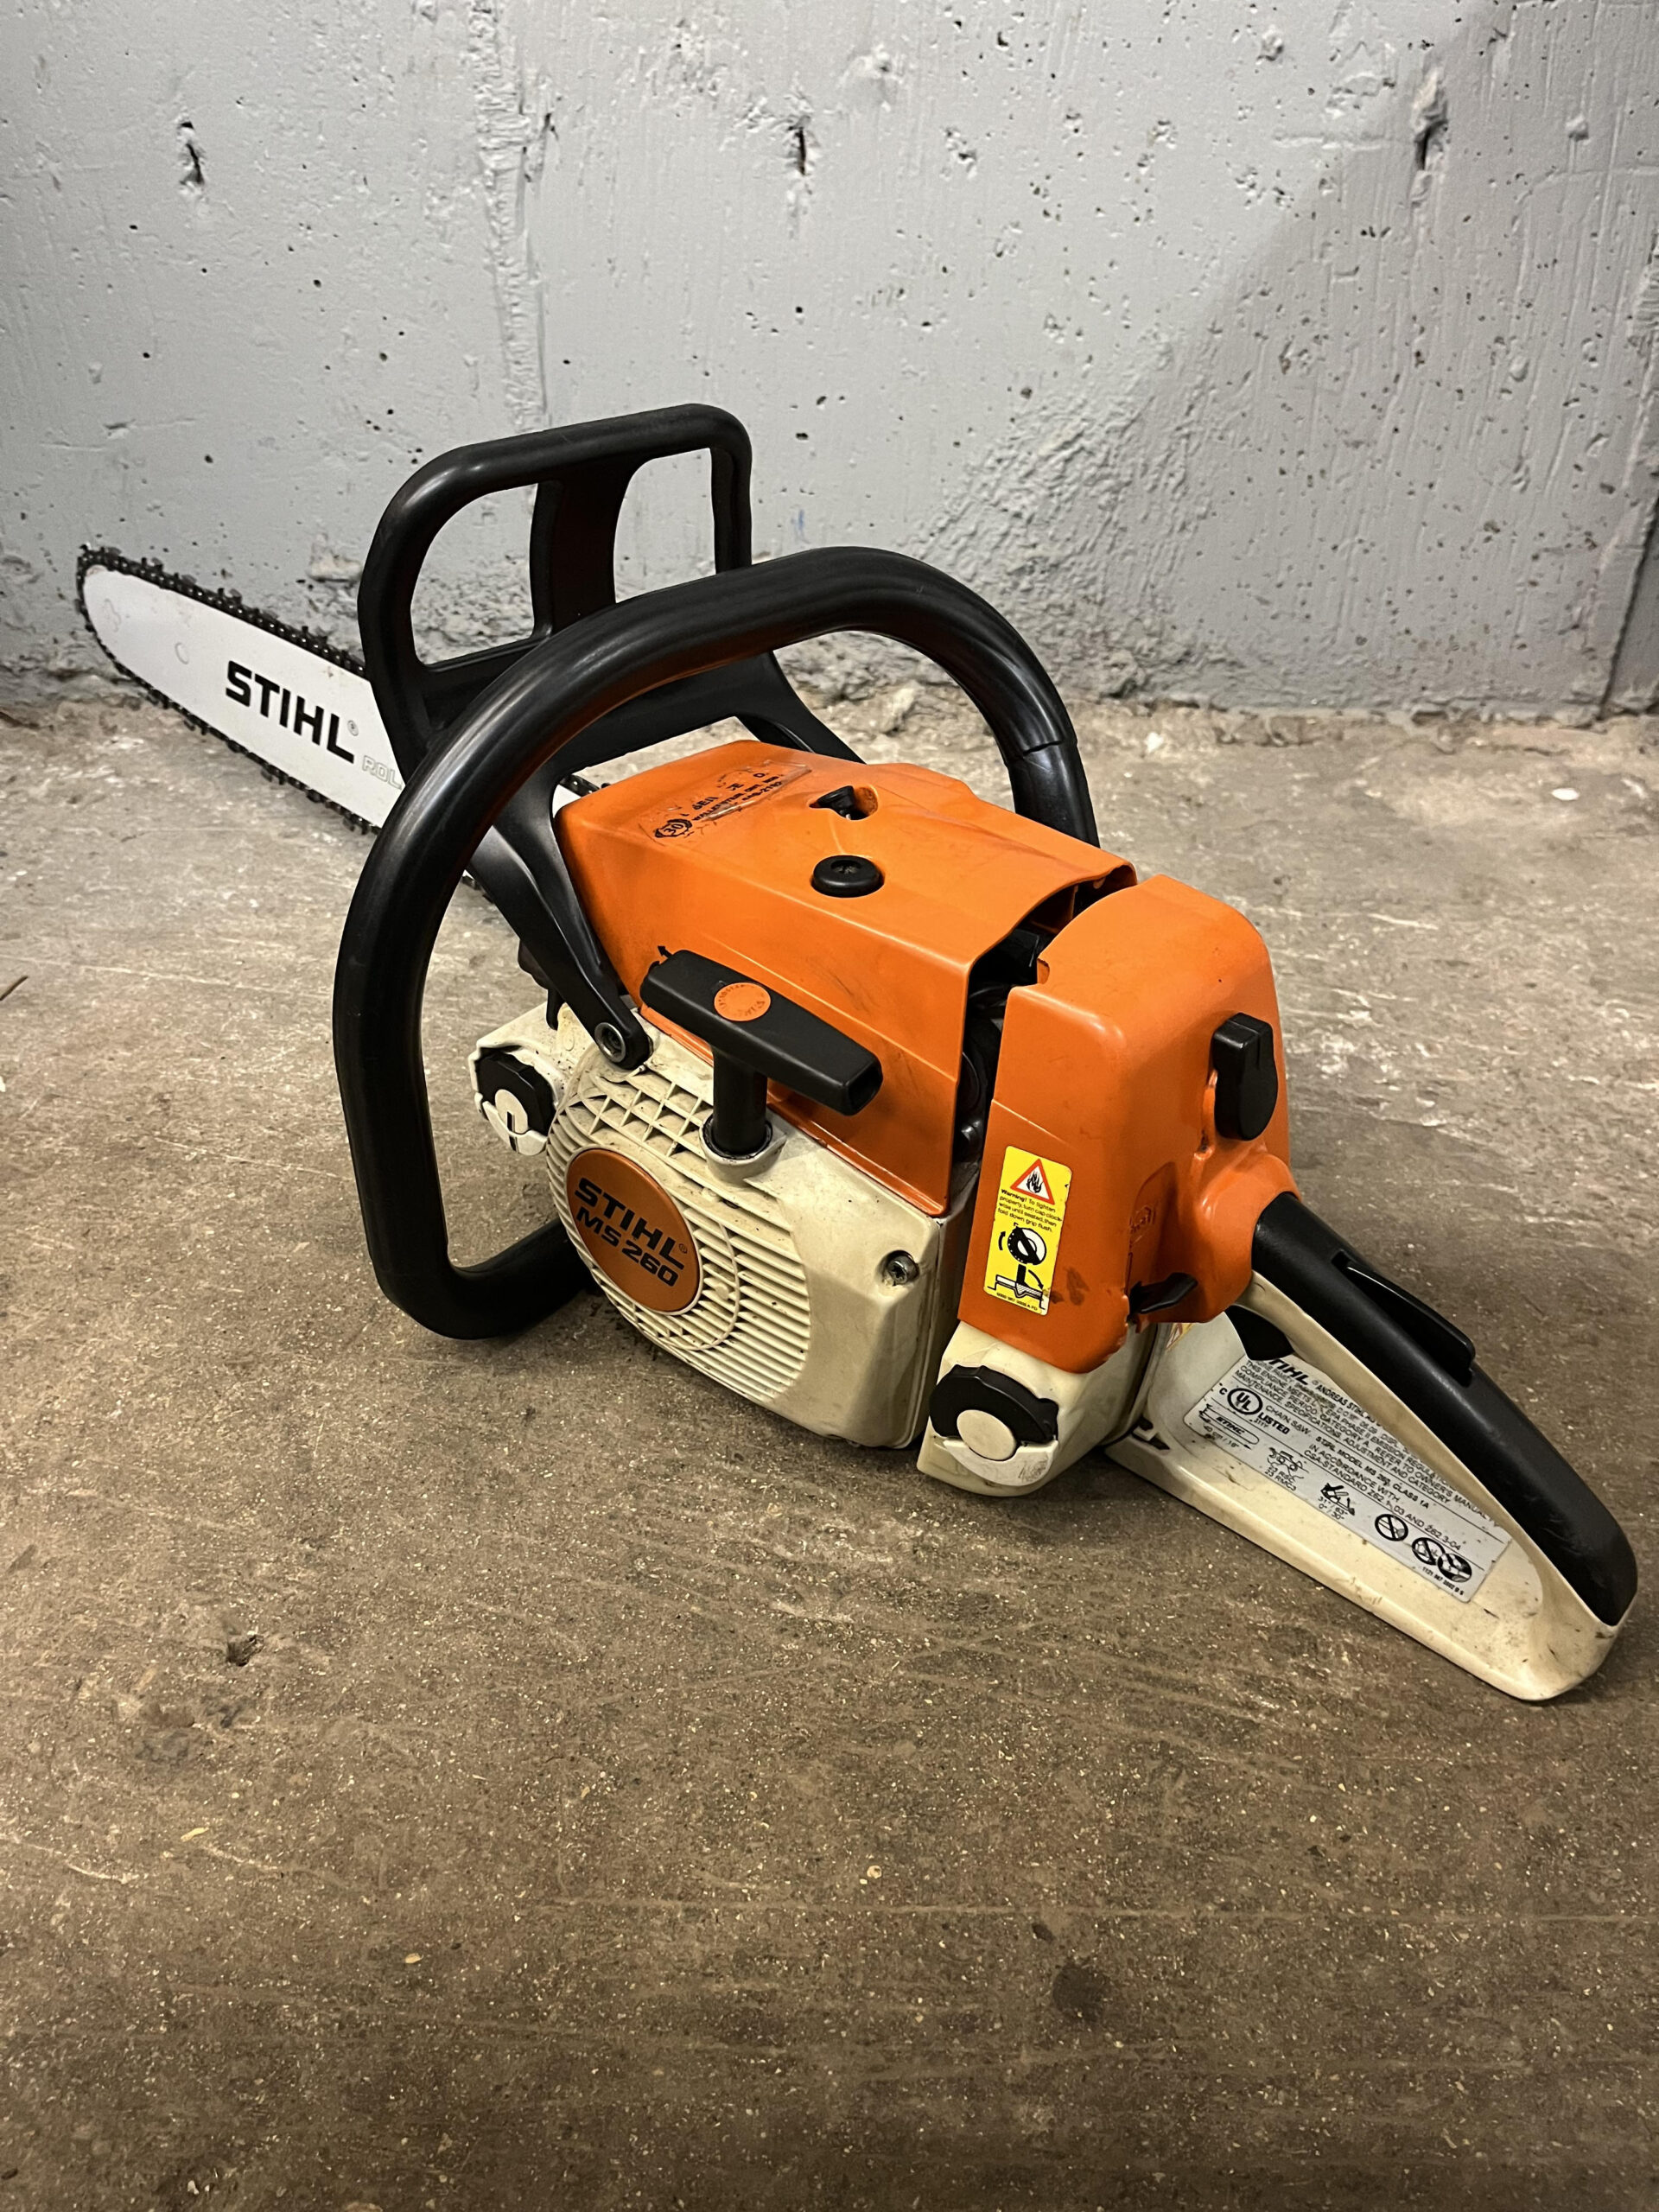 MS260 chainsaw with 18” bar! 